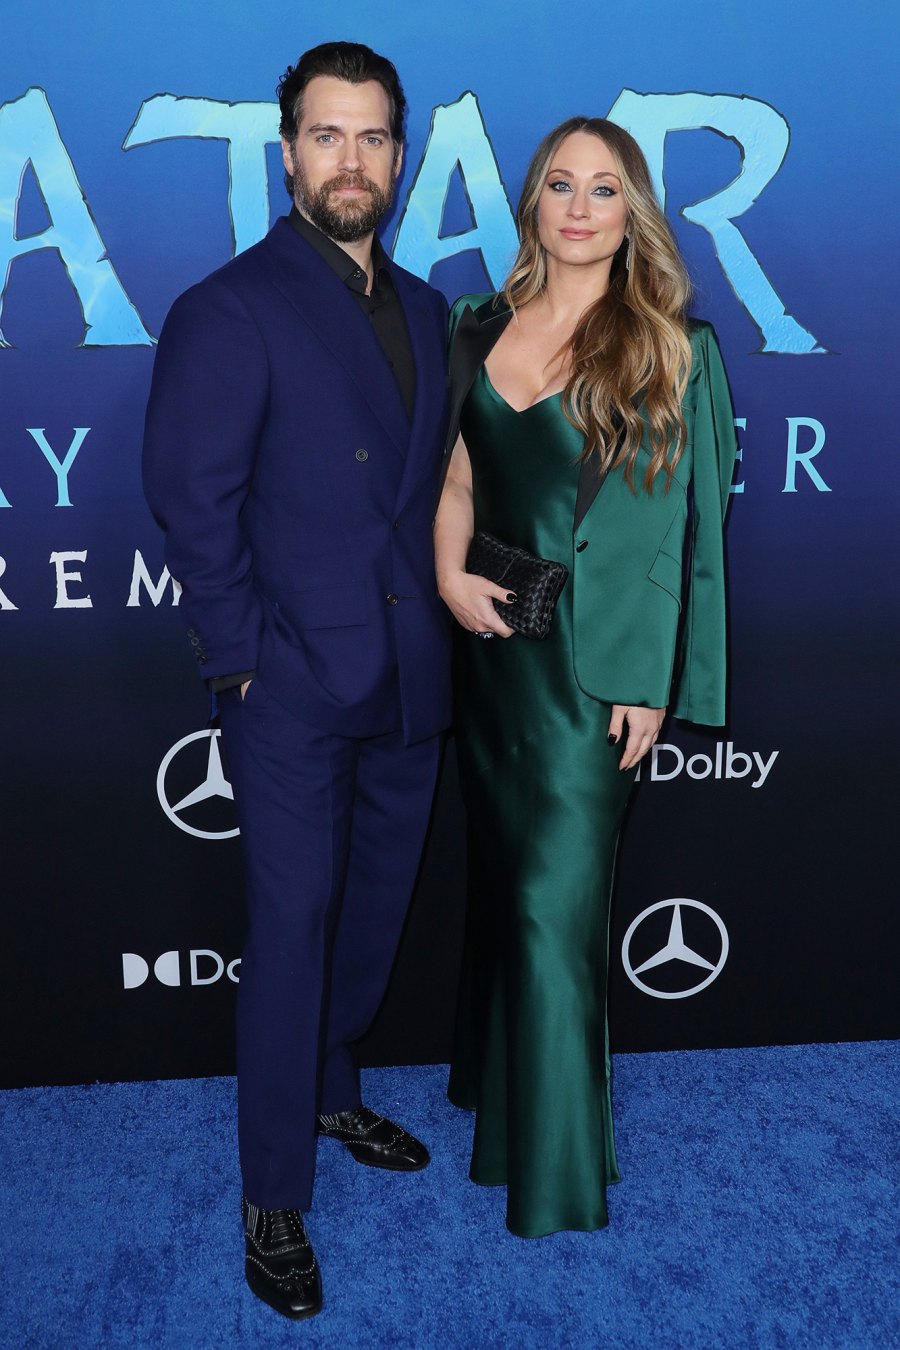 Heidi Klum at Way of Water Premiere - Henry Cavill and Natalie Viscuso 148 'Avatar: The Way of Water' film premiere, Los Angeles, California, USA - 12 Dec 2022